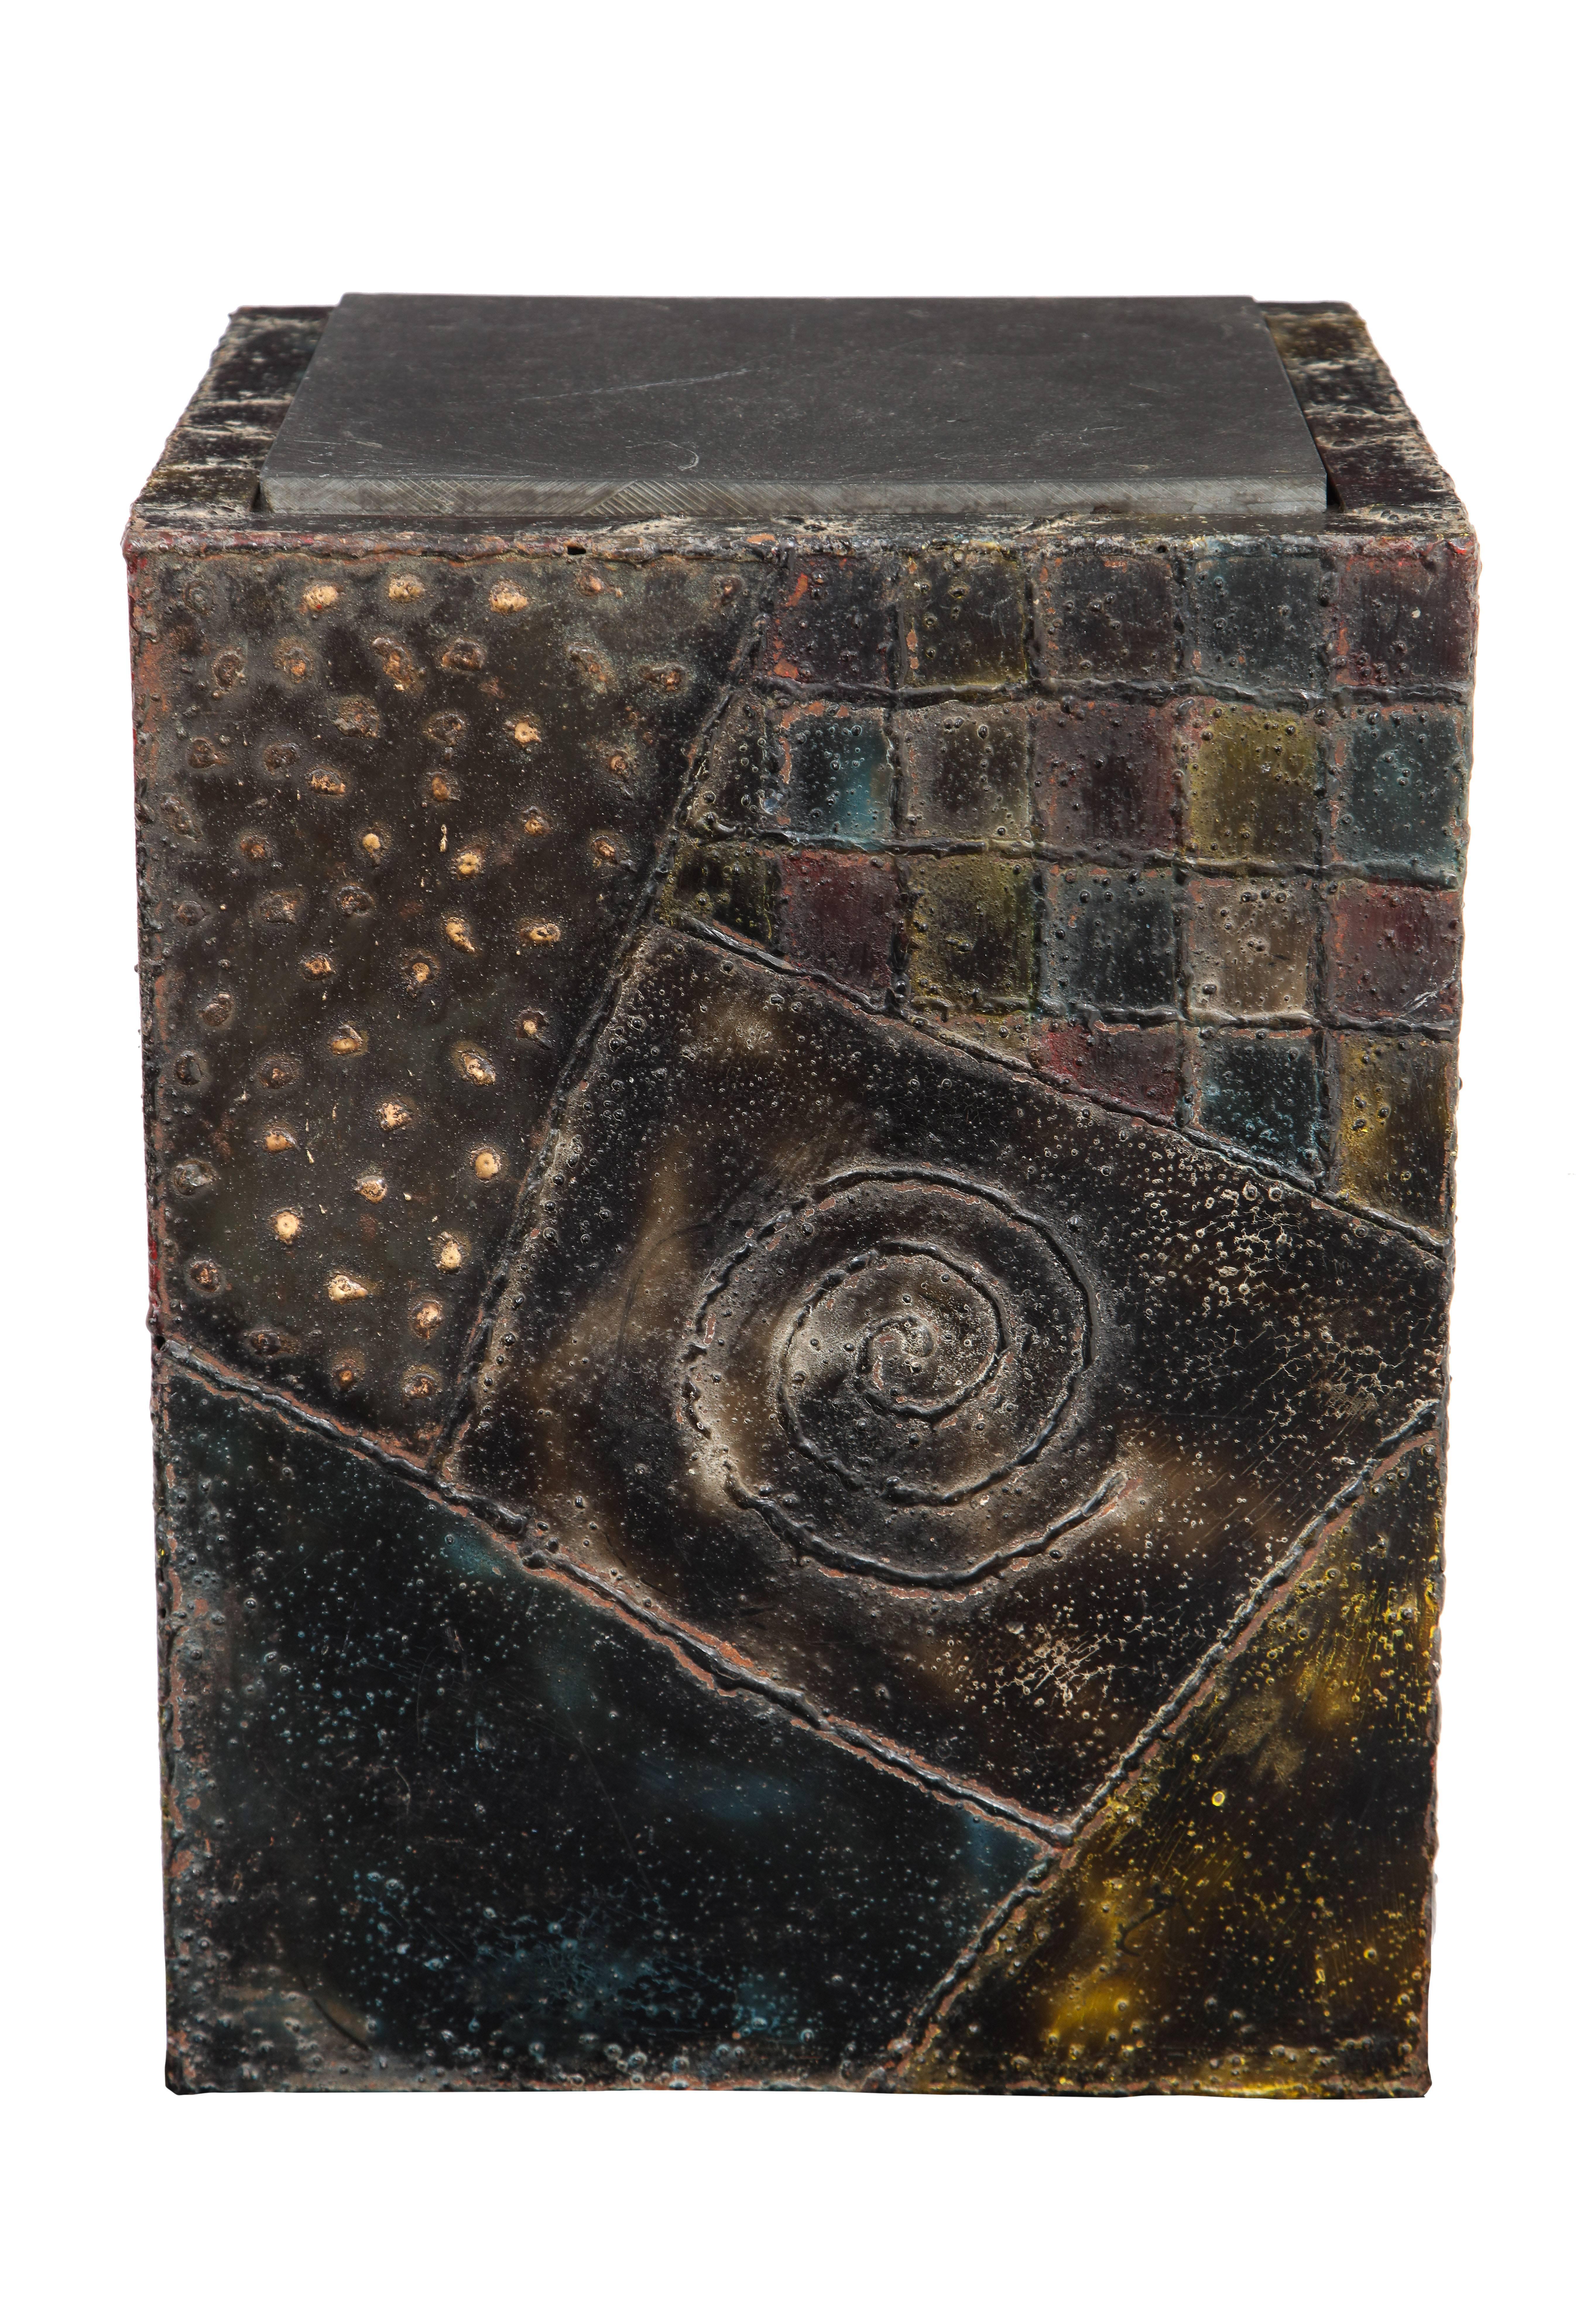 Paul Evans side table, welded painted steel, bronze and slate, signed. Handcrafted side table with slate top in original condition. The blue, yellow and red paint have aged in such a way as to give the appearance of sapphire gemstones. Signed PE 69